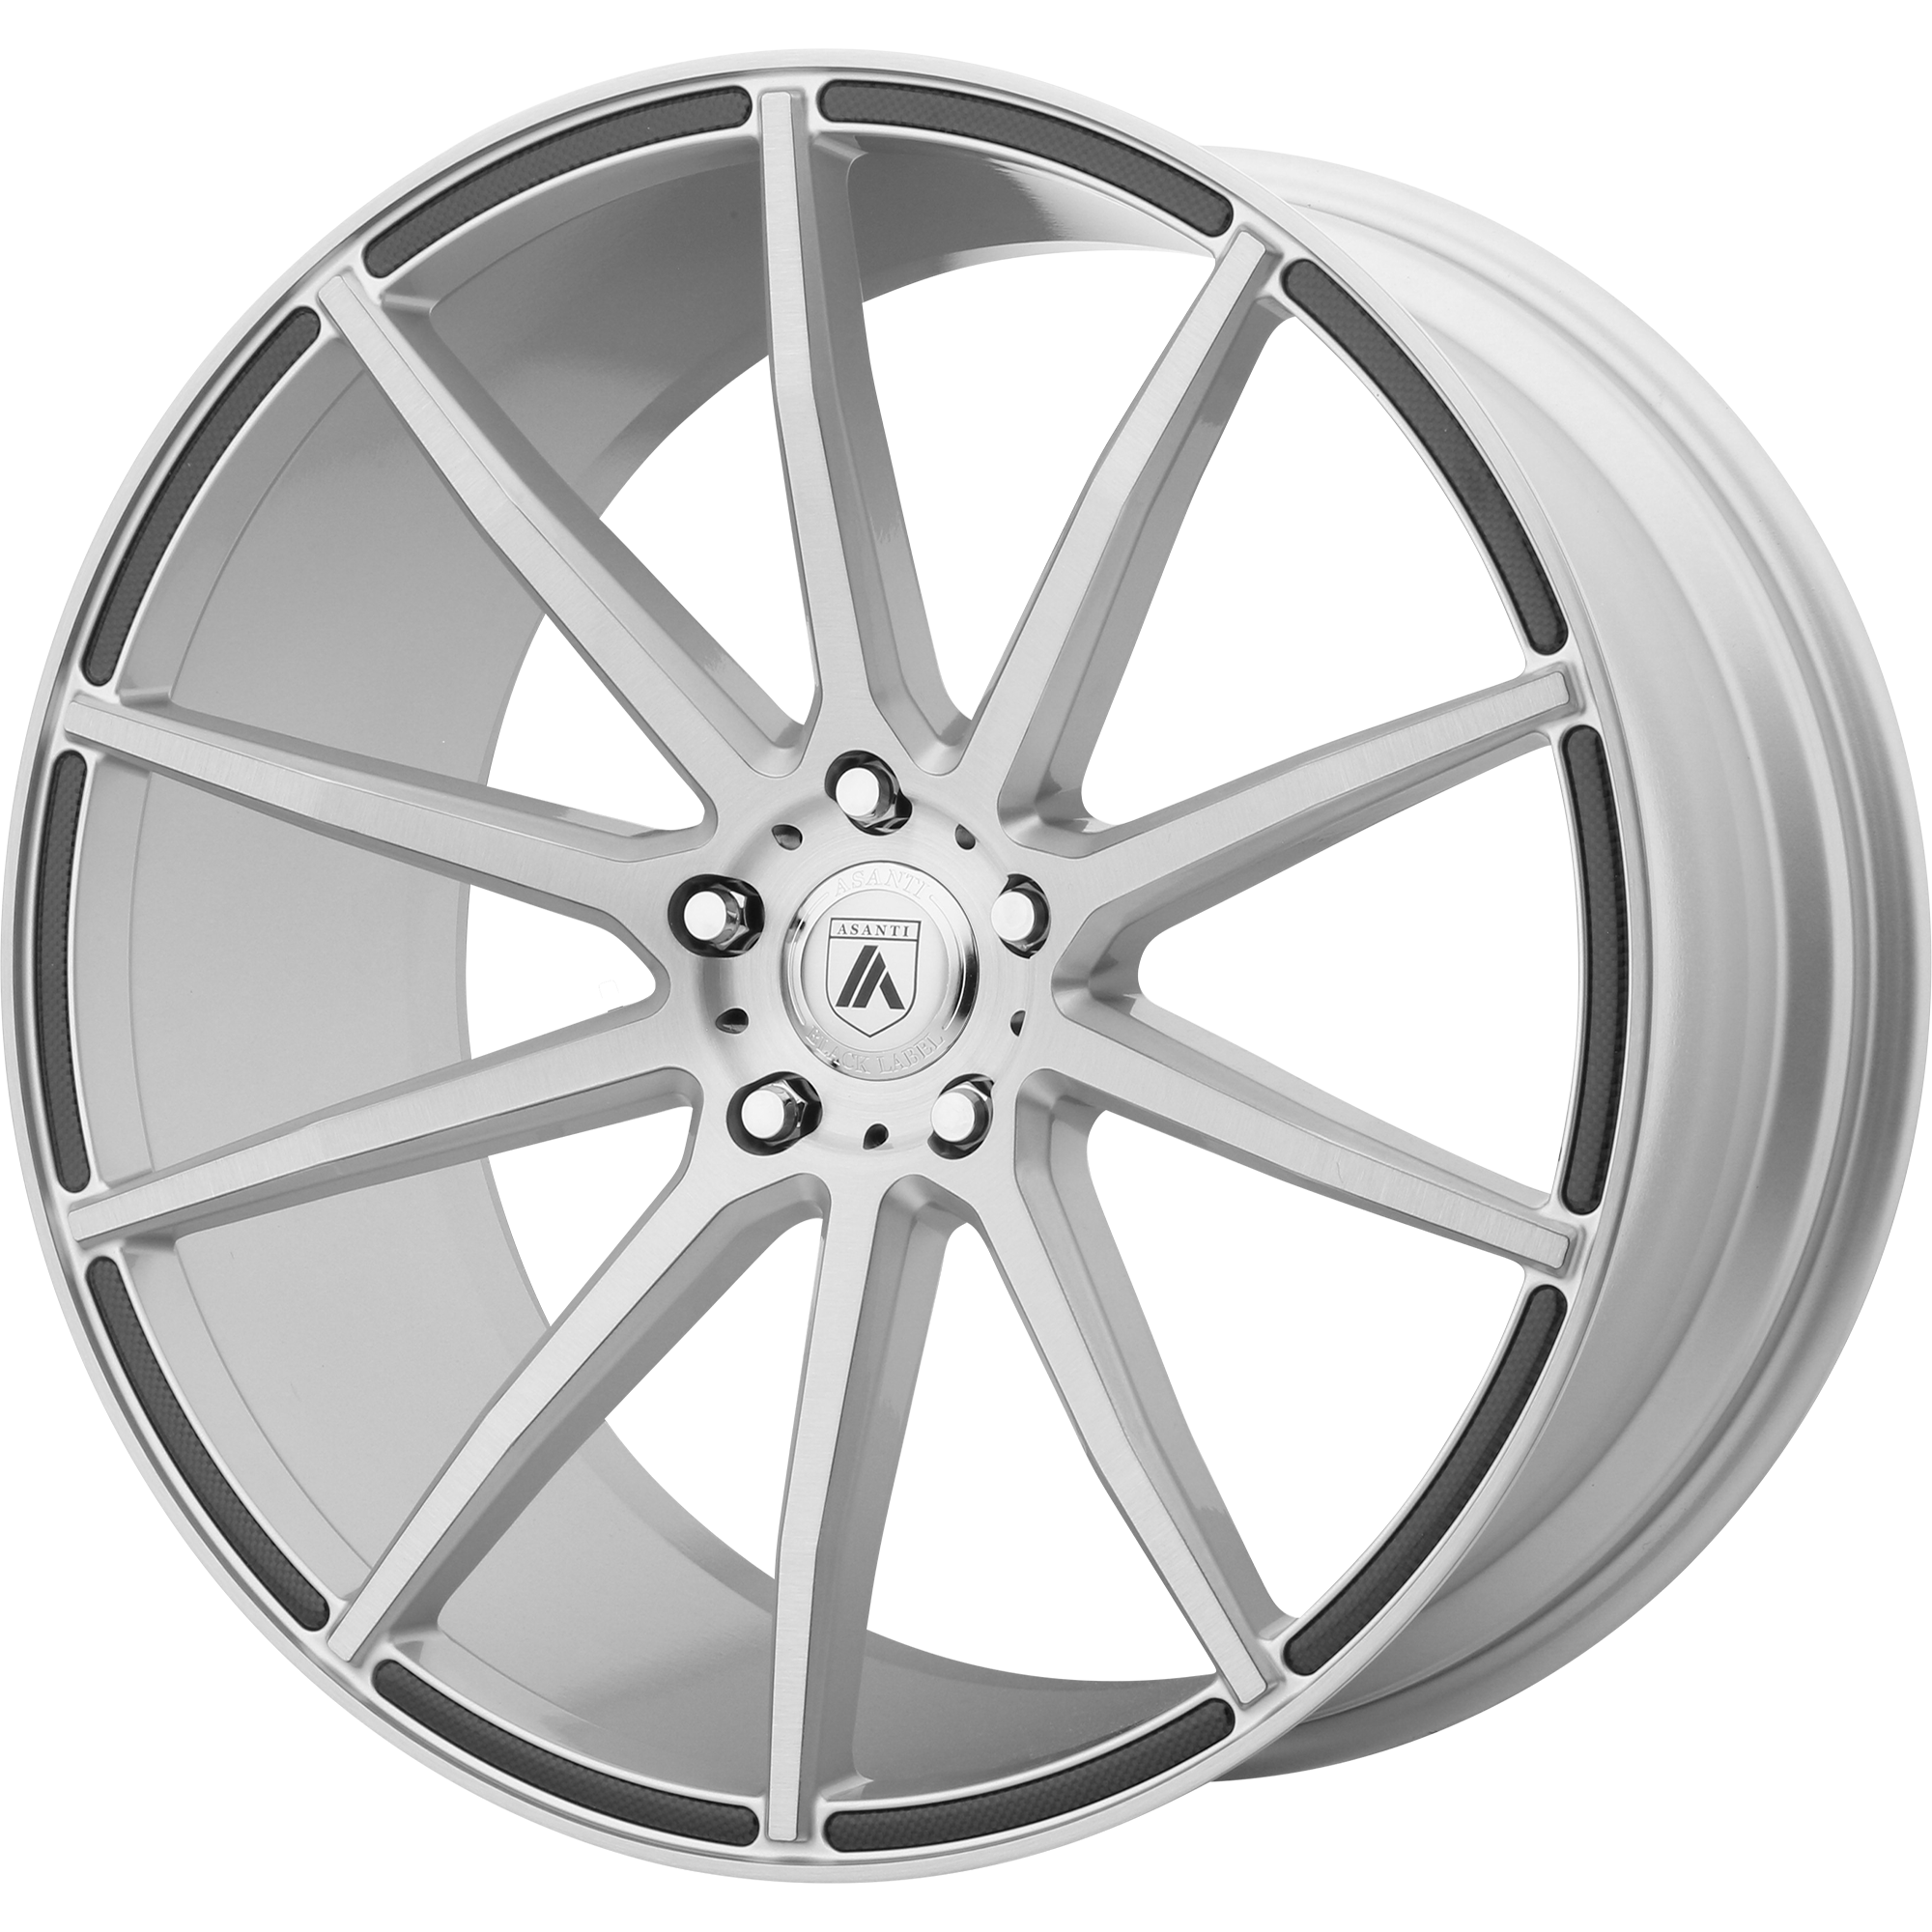 ARIES 20x8.5 5x112.00 BRUSHED SILVER (38 mm) - Tires and Engine Performance